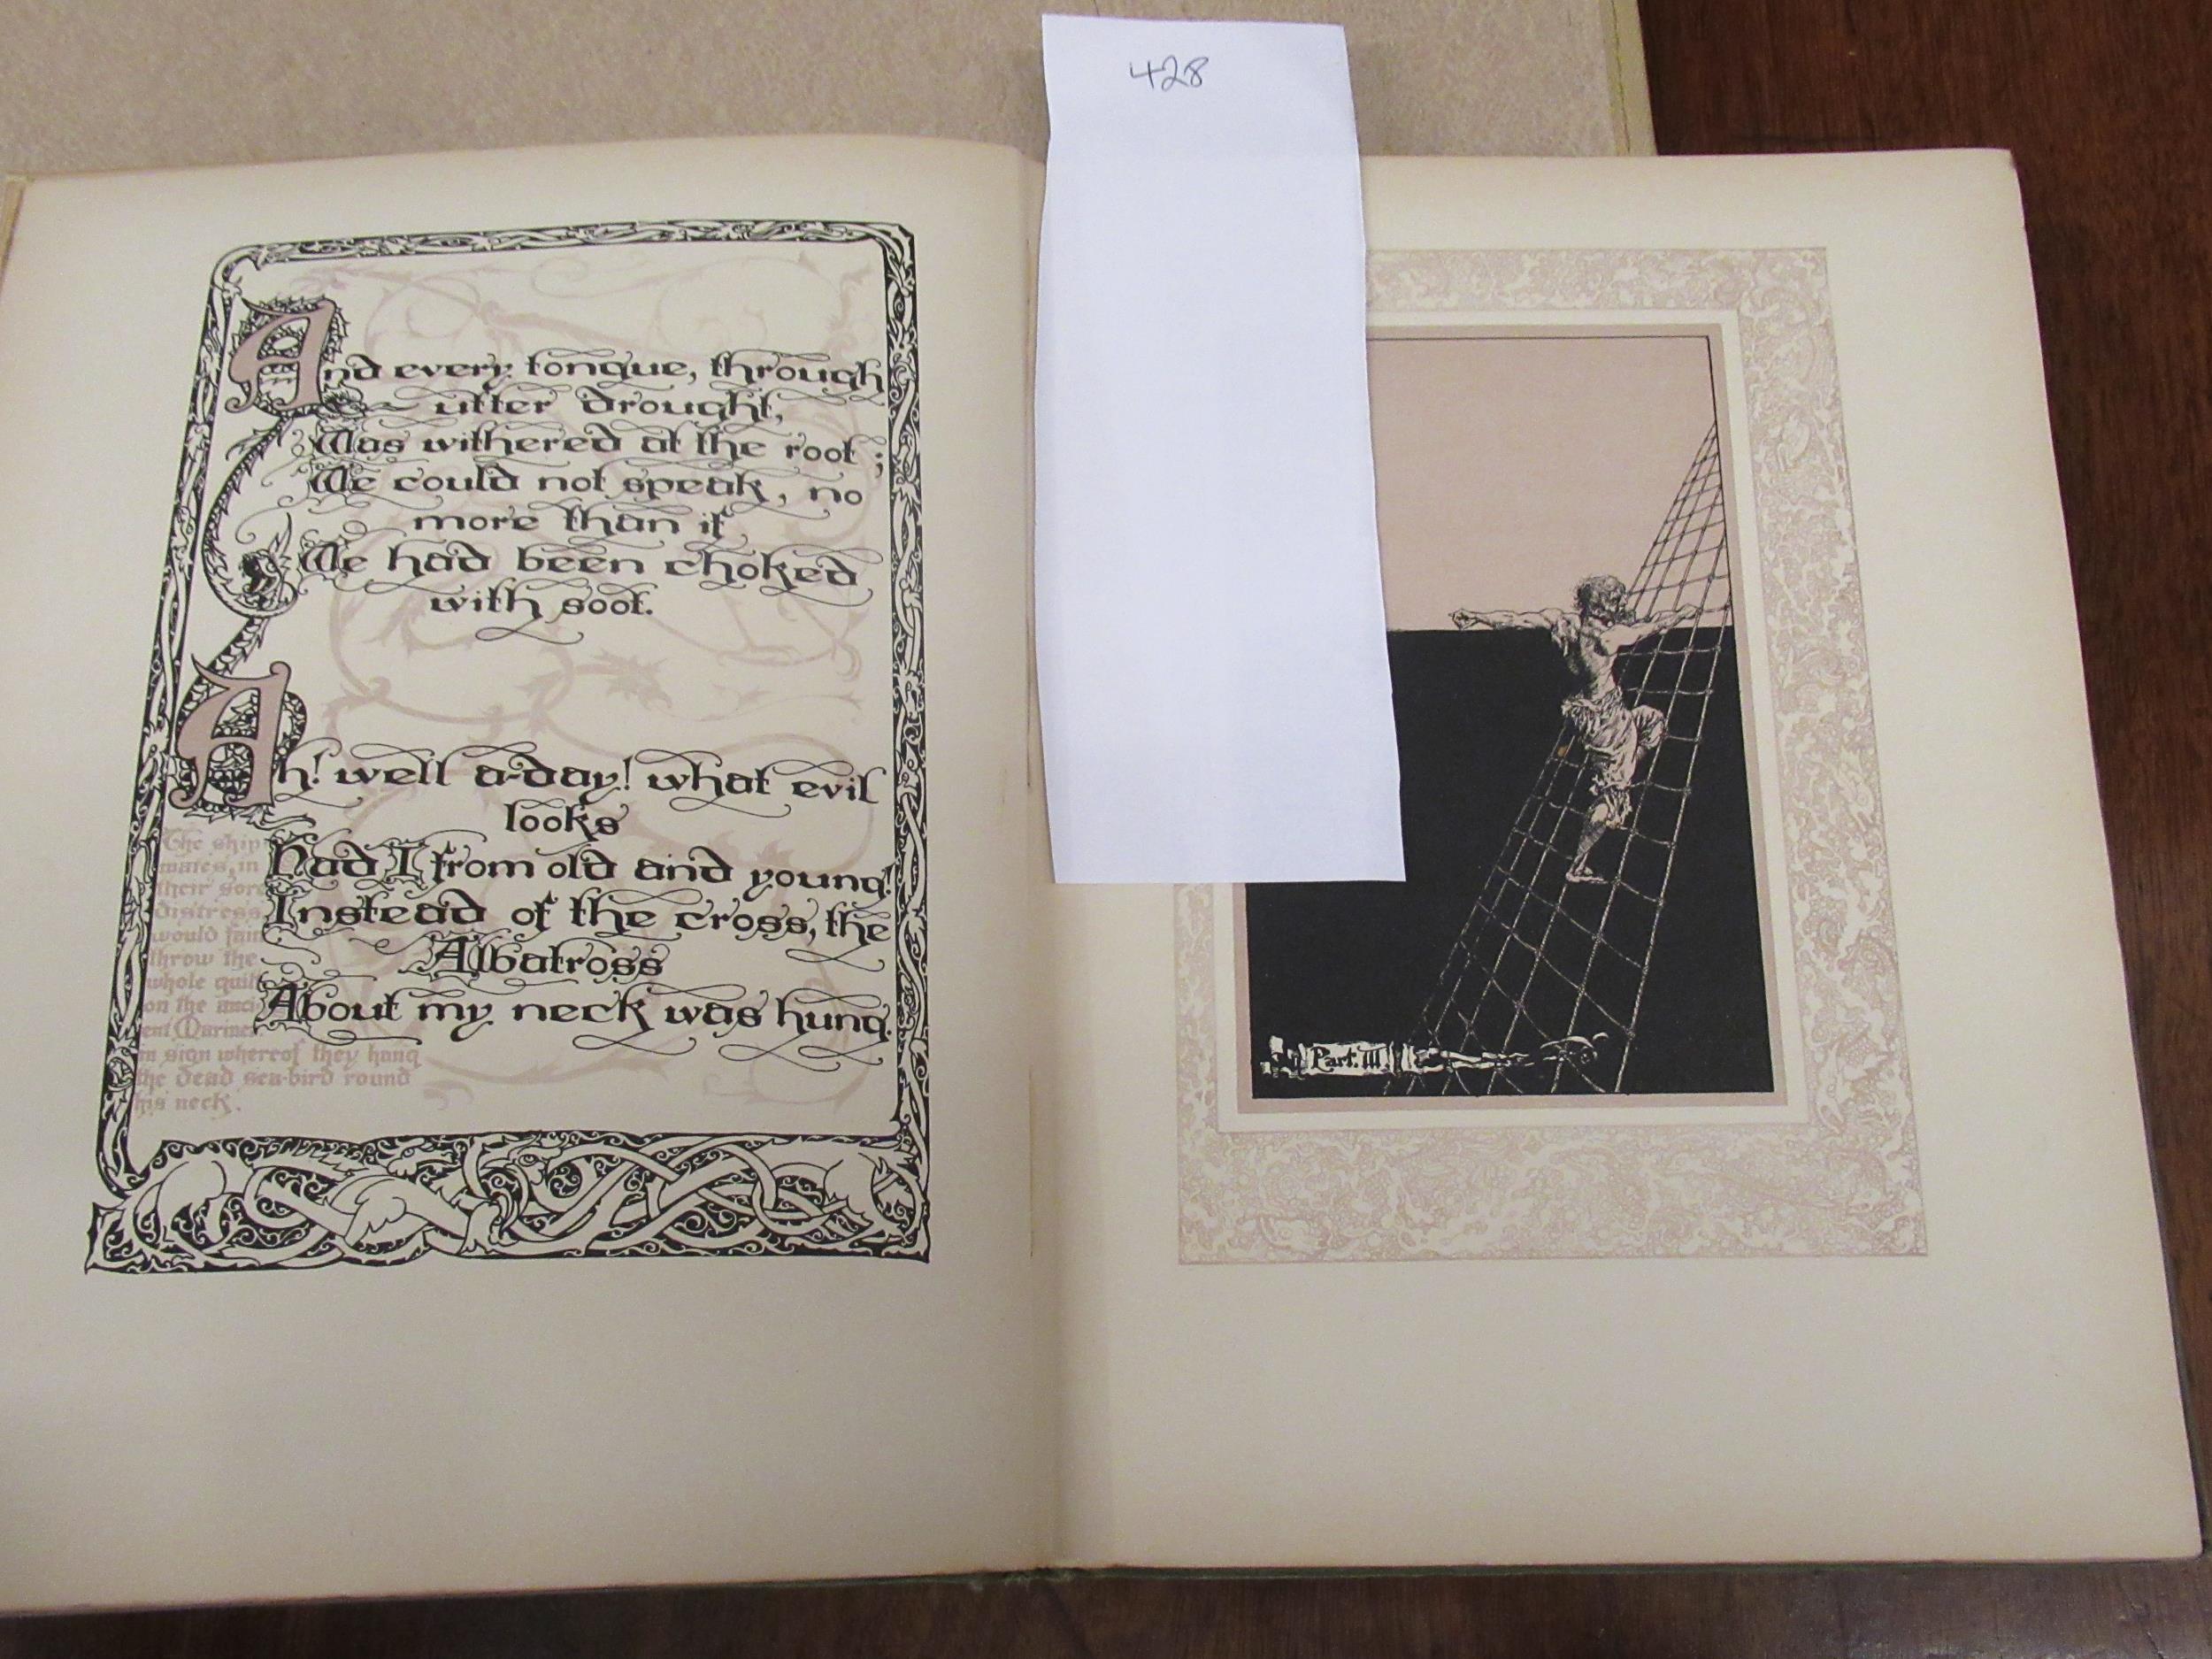 ' The Lyceum and Henry Irving ' by Austin Brereton, Limited Edition copy No. 309 of 1500, with - Image 17 of 21